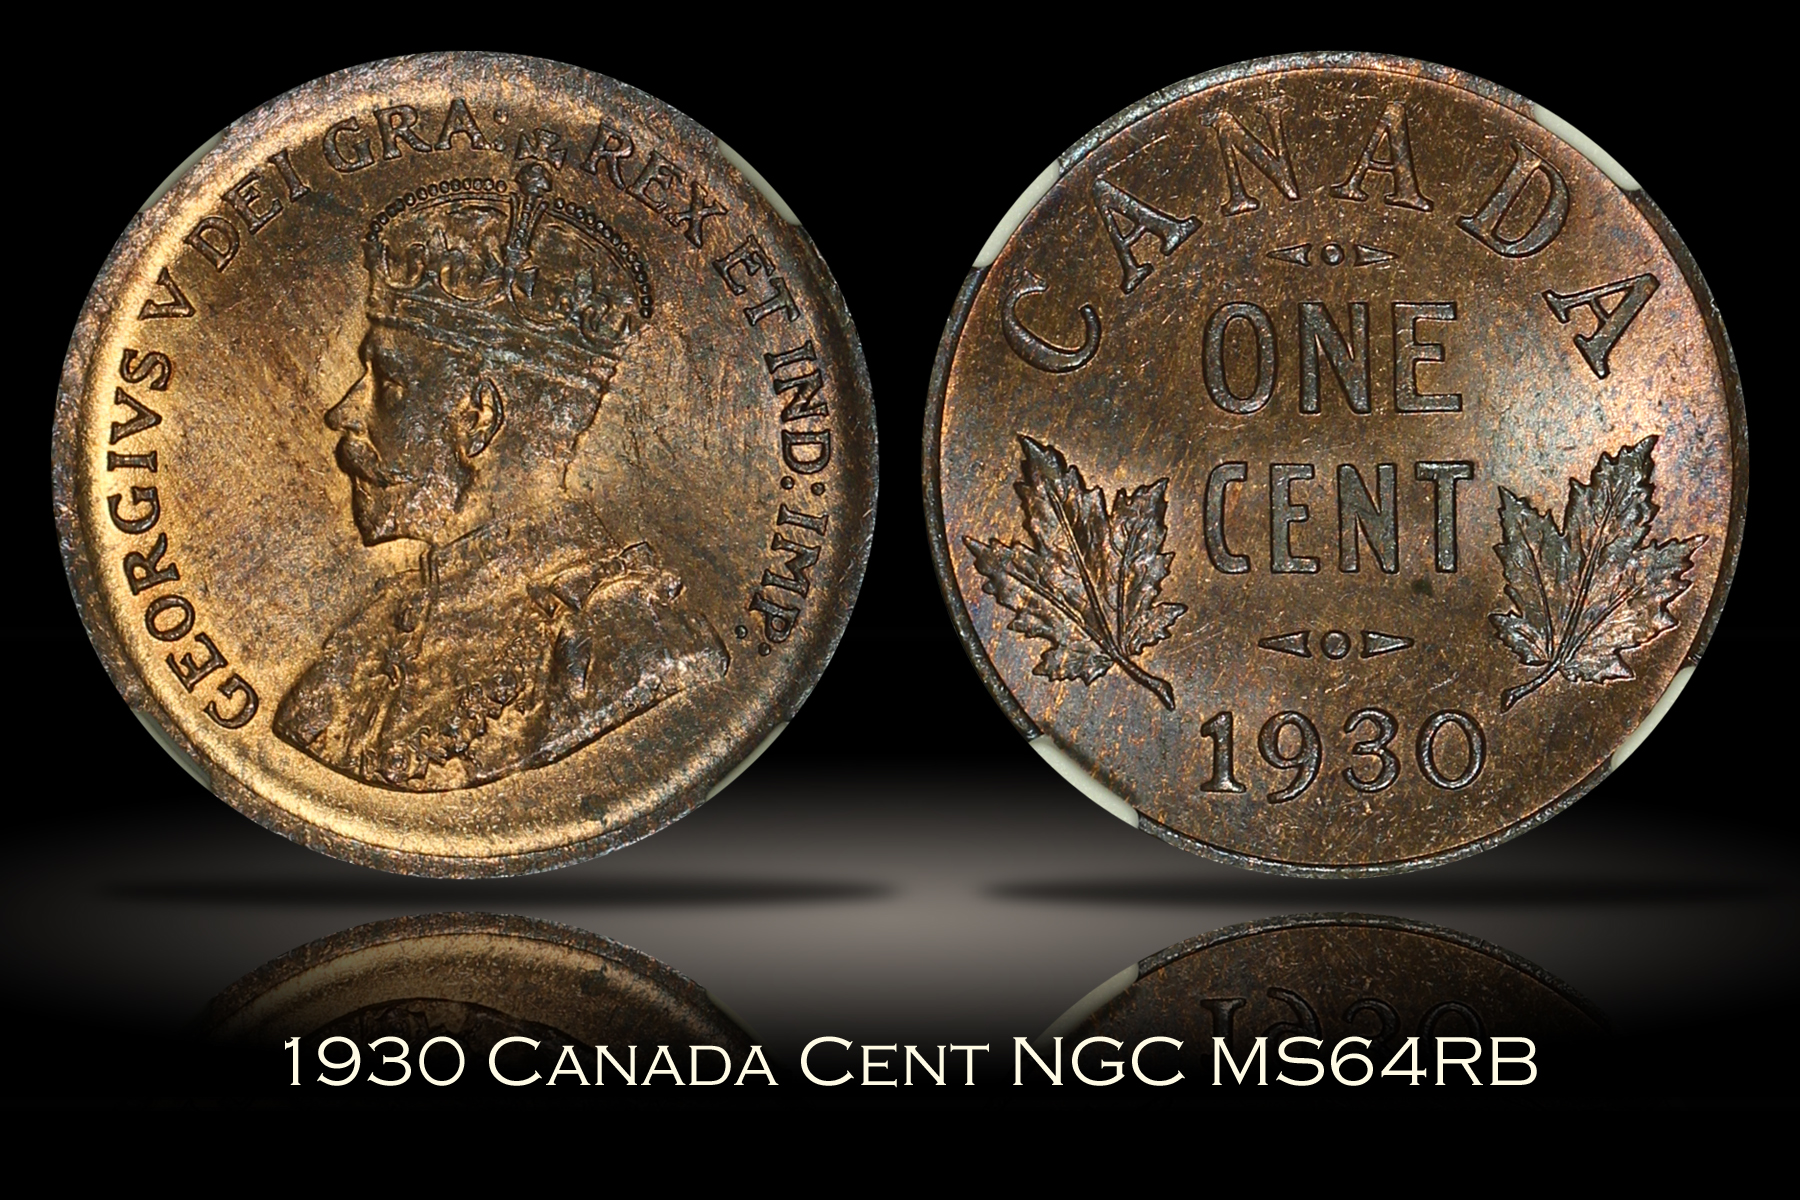 1930 Canada Cent NGC MS64RB